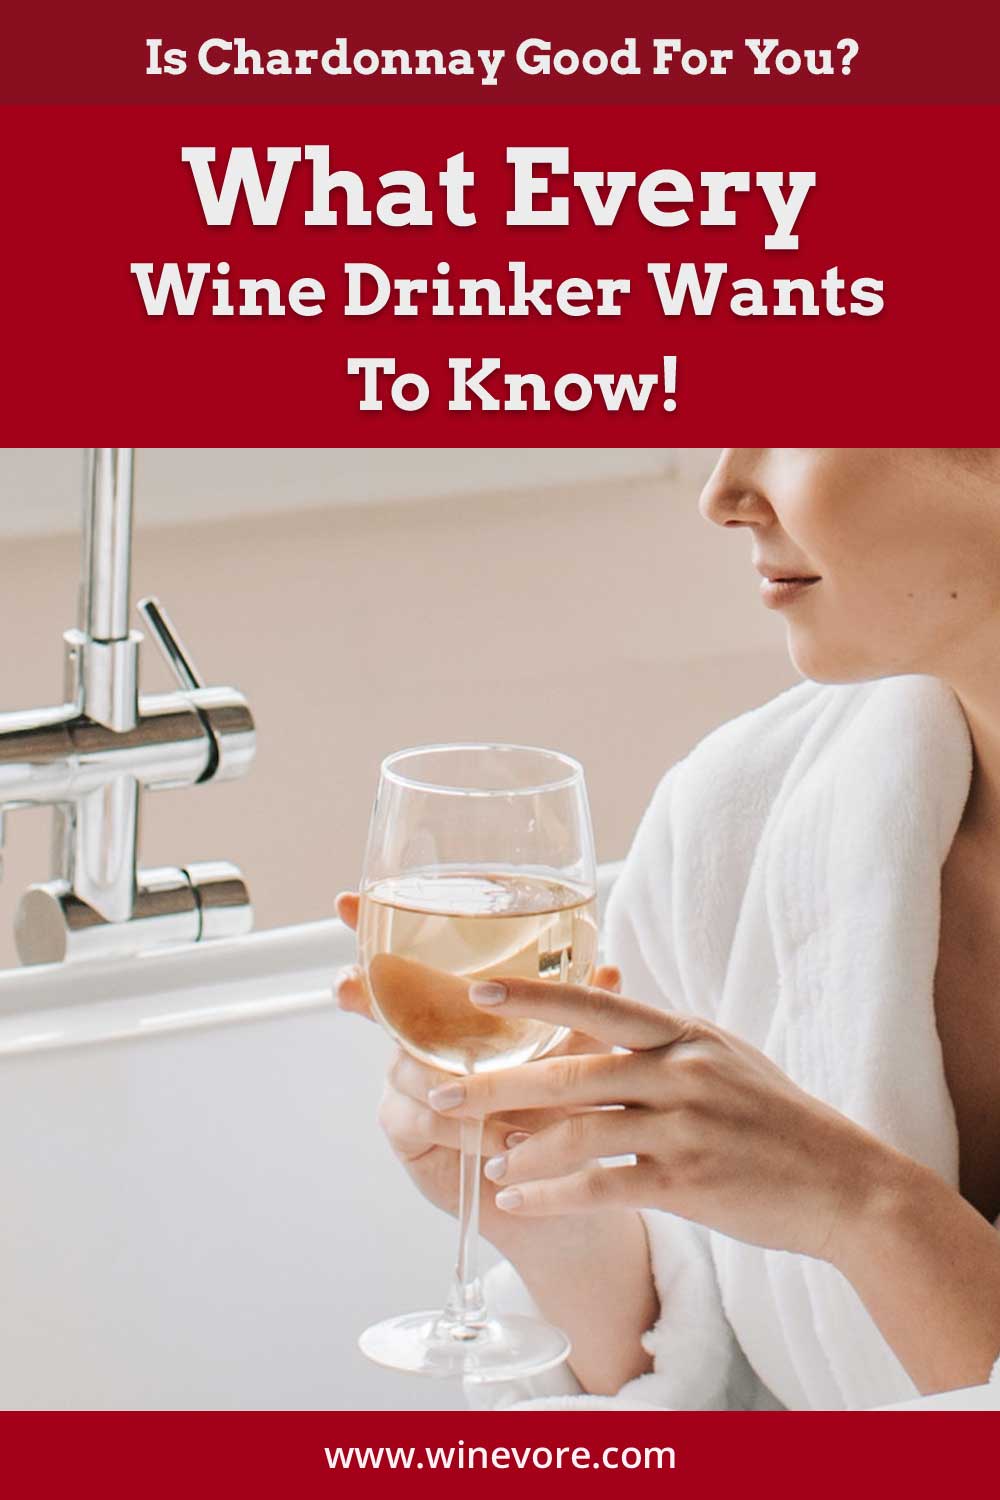 Woman with a wine glass in a bath tub - Is Chardonnay Good For You?